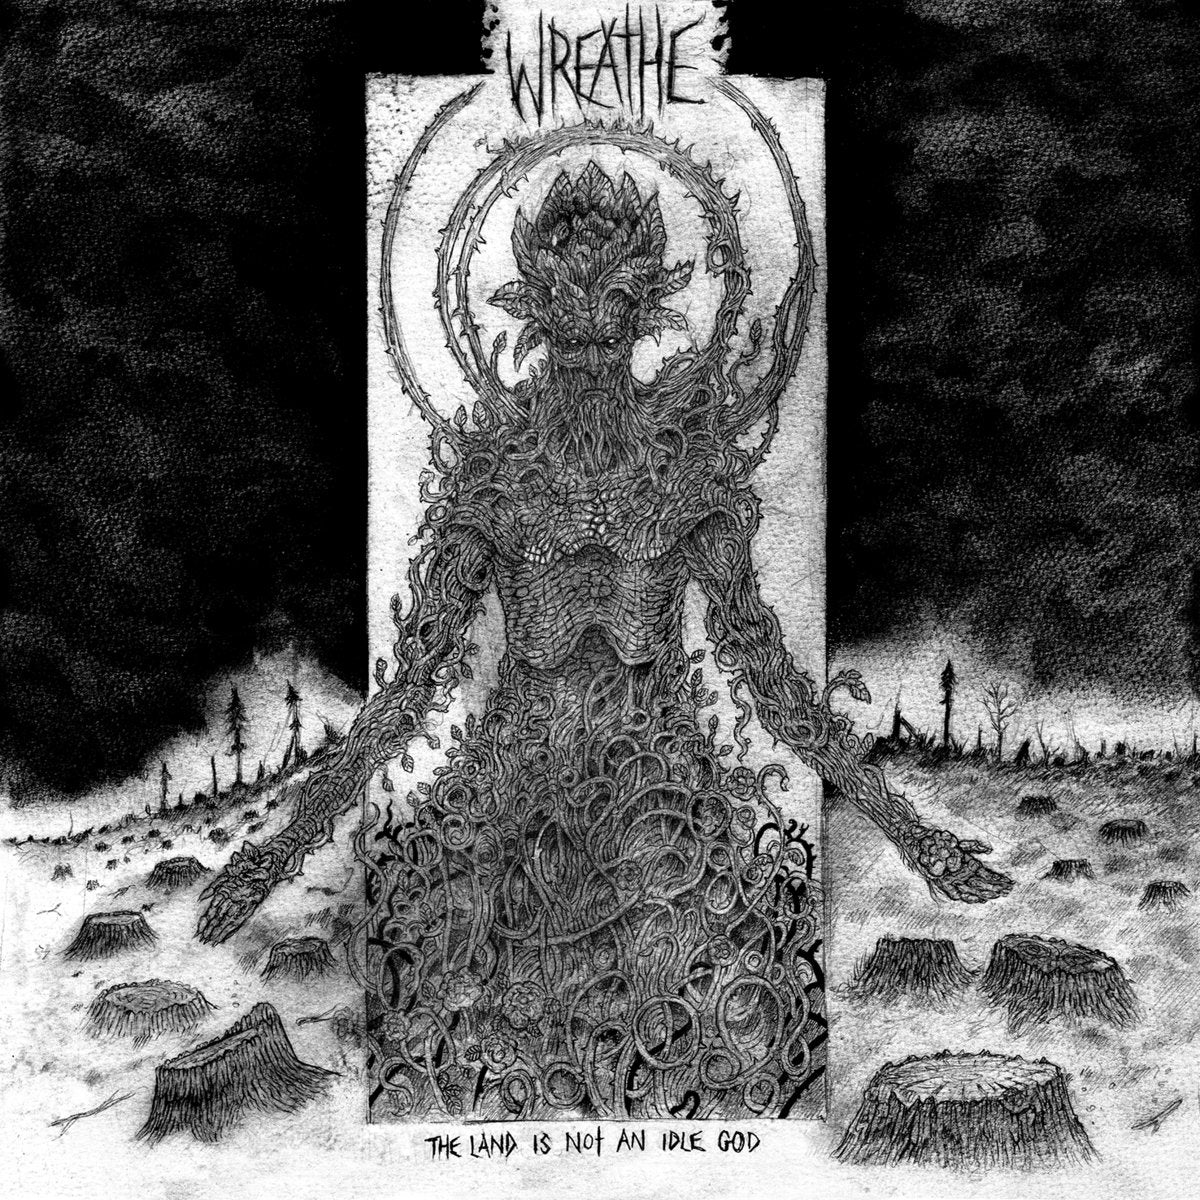 Wreathe "The Land Is Not An Idle God" LP